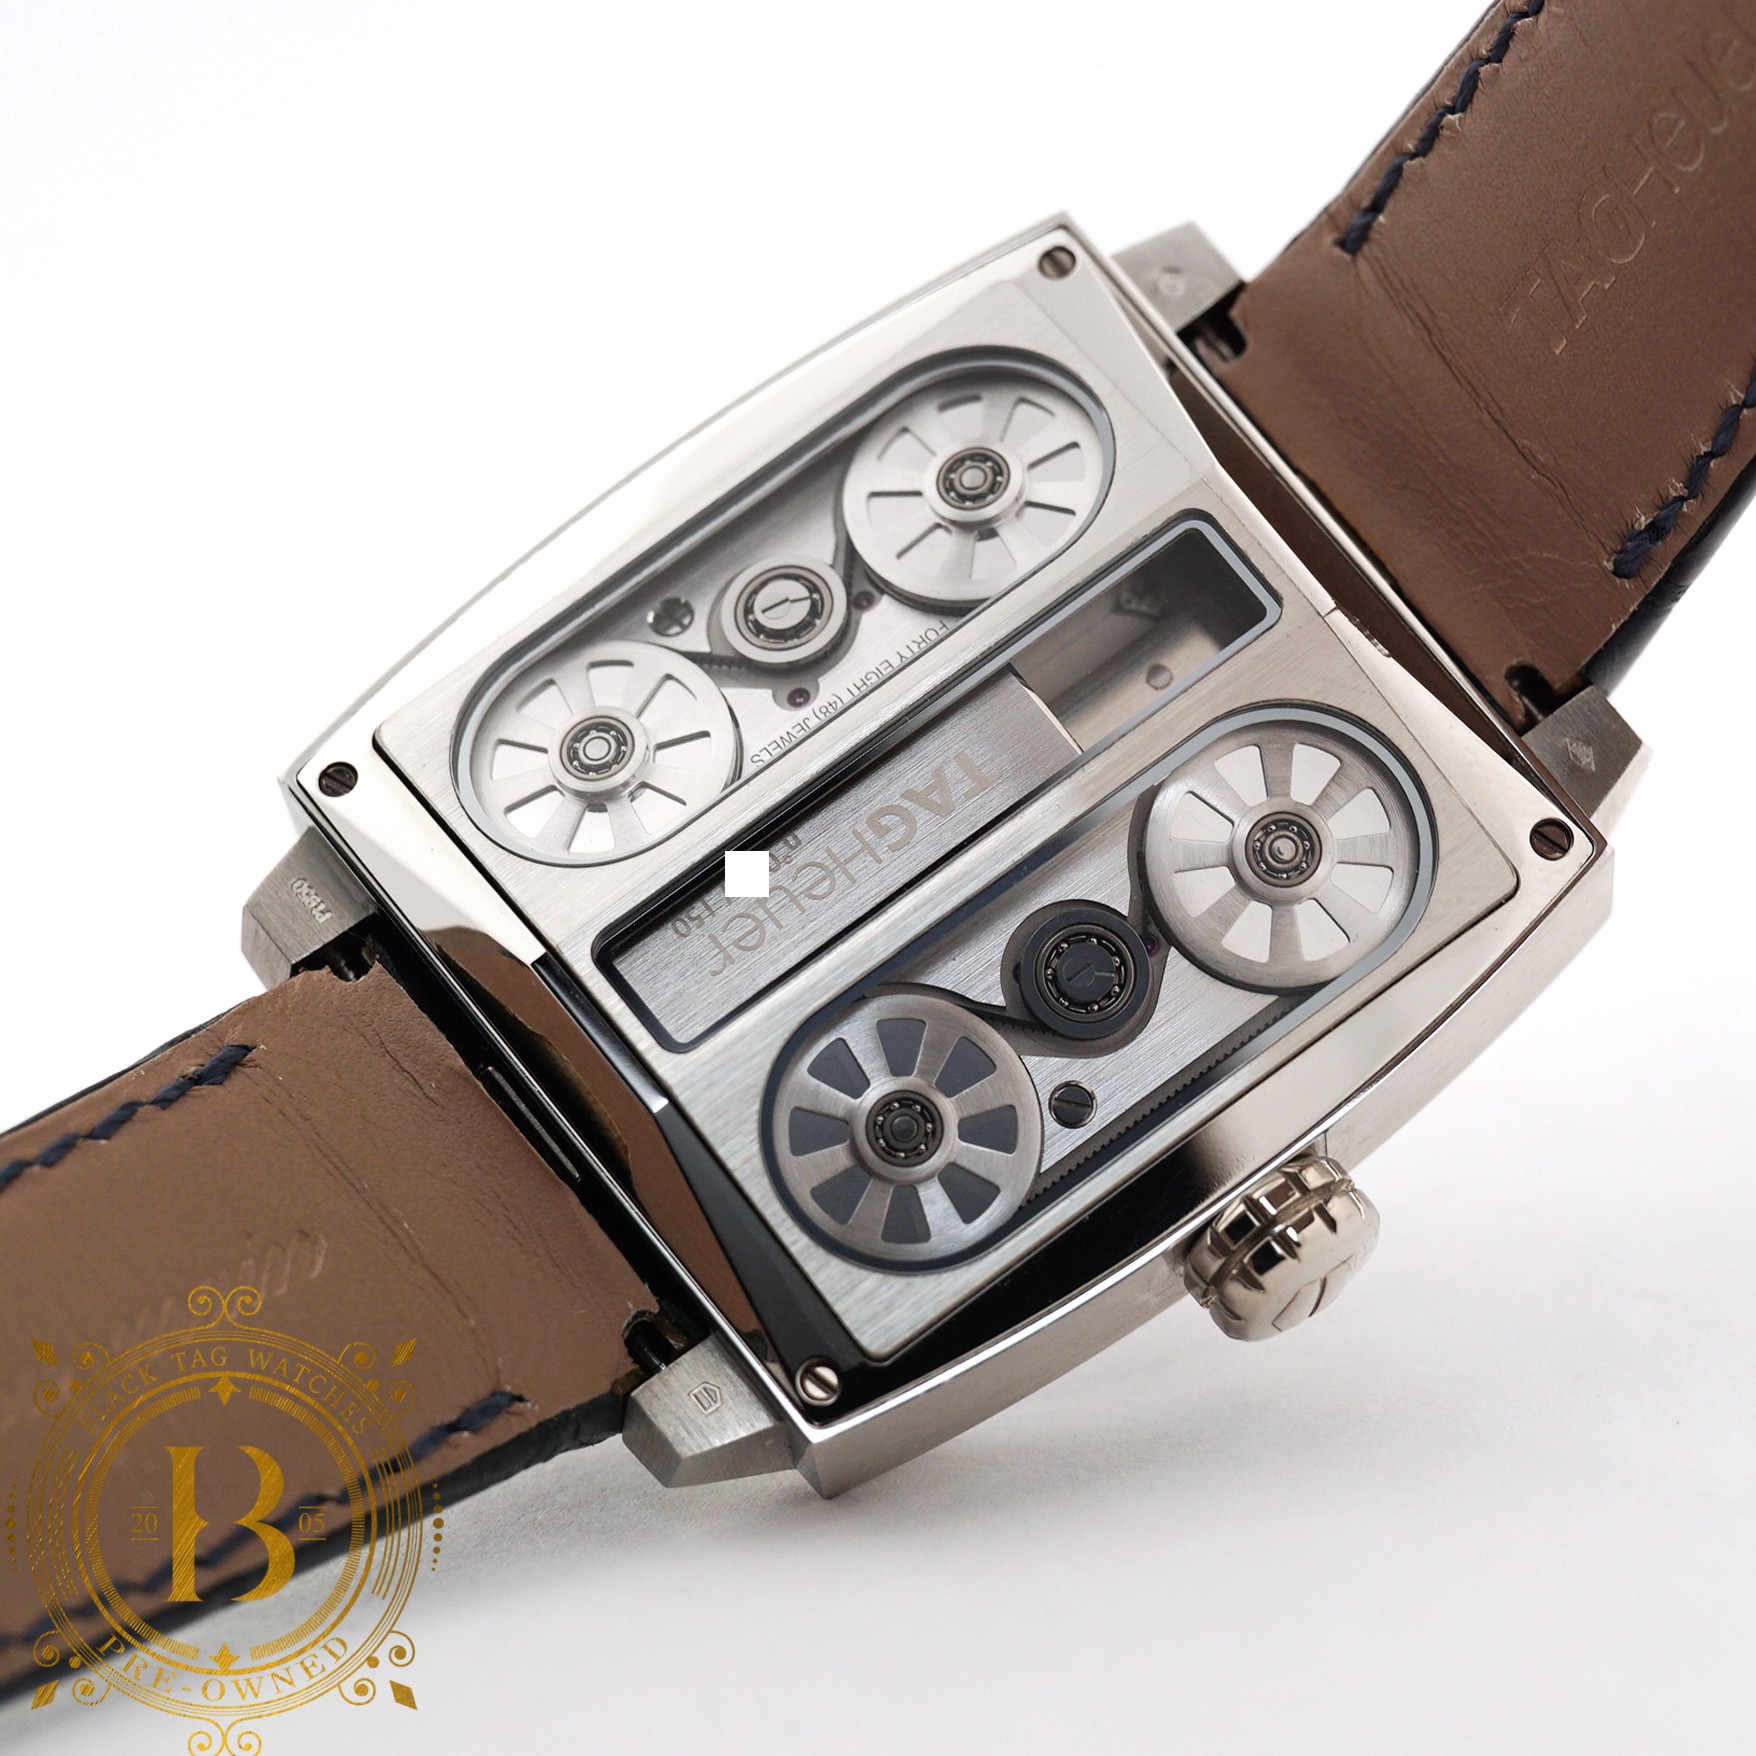 TAG Heuer Monaco V4 Limited Edition for $42,999 for sale from a Seller on  Chrono24